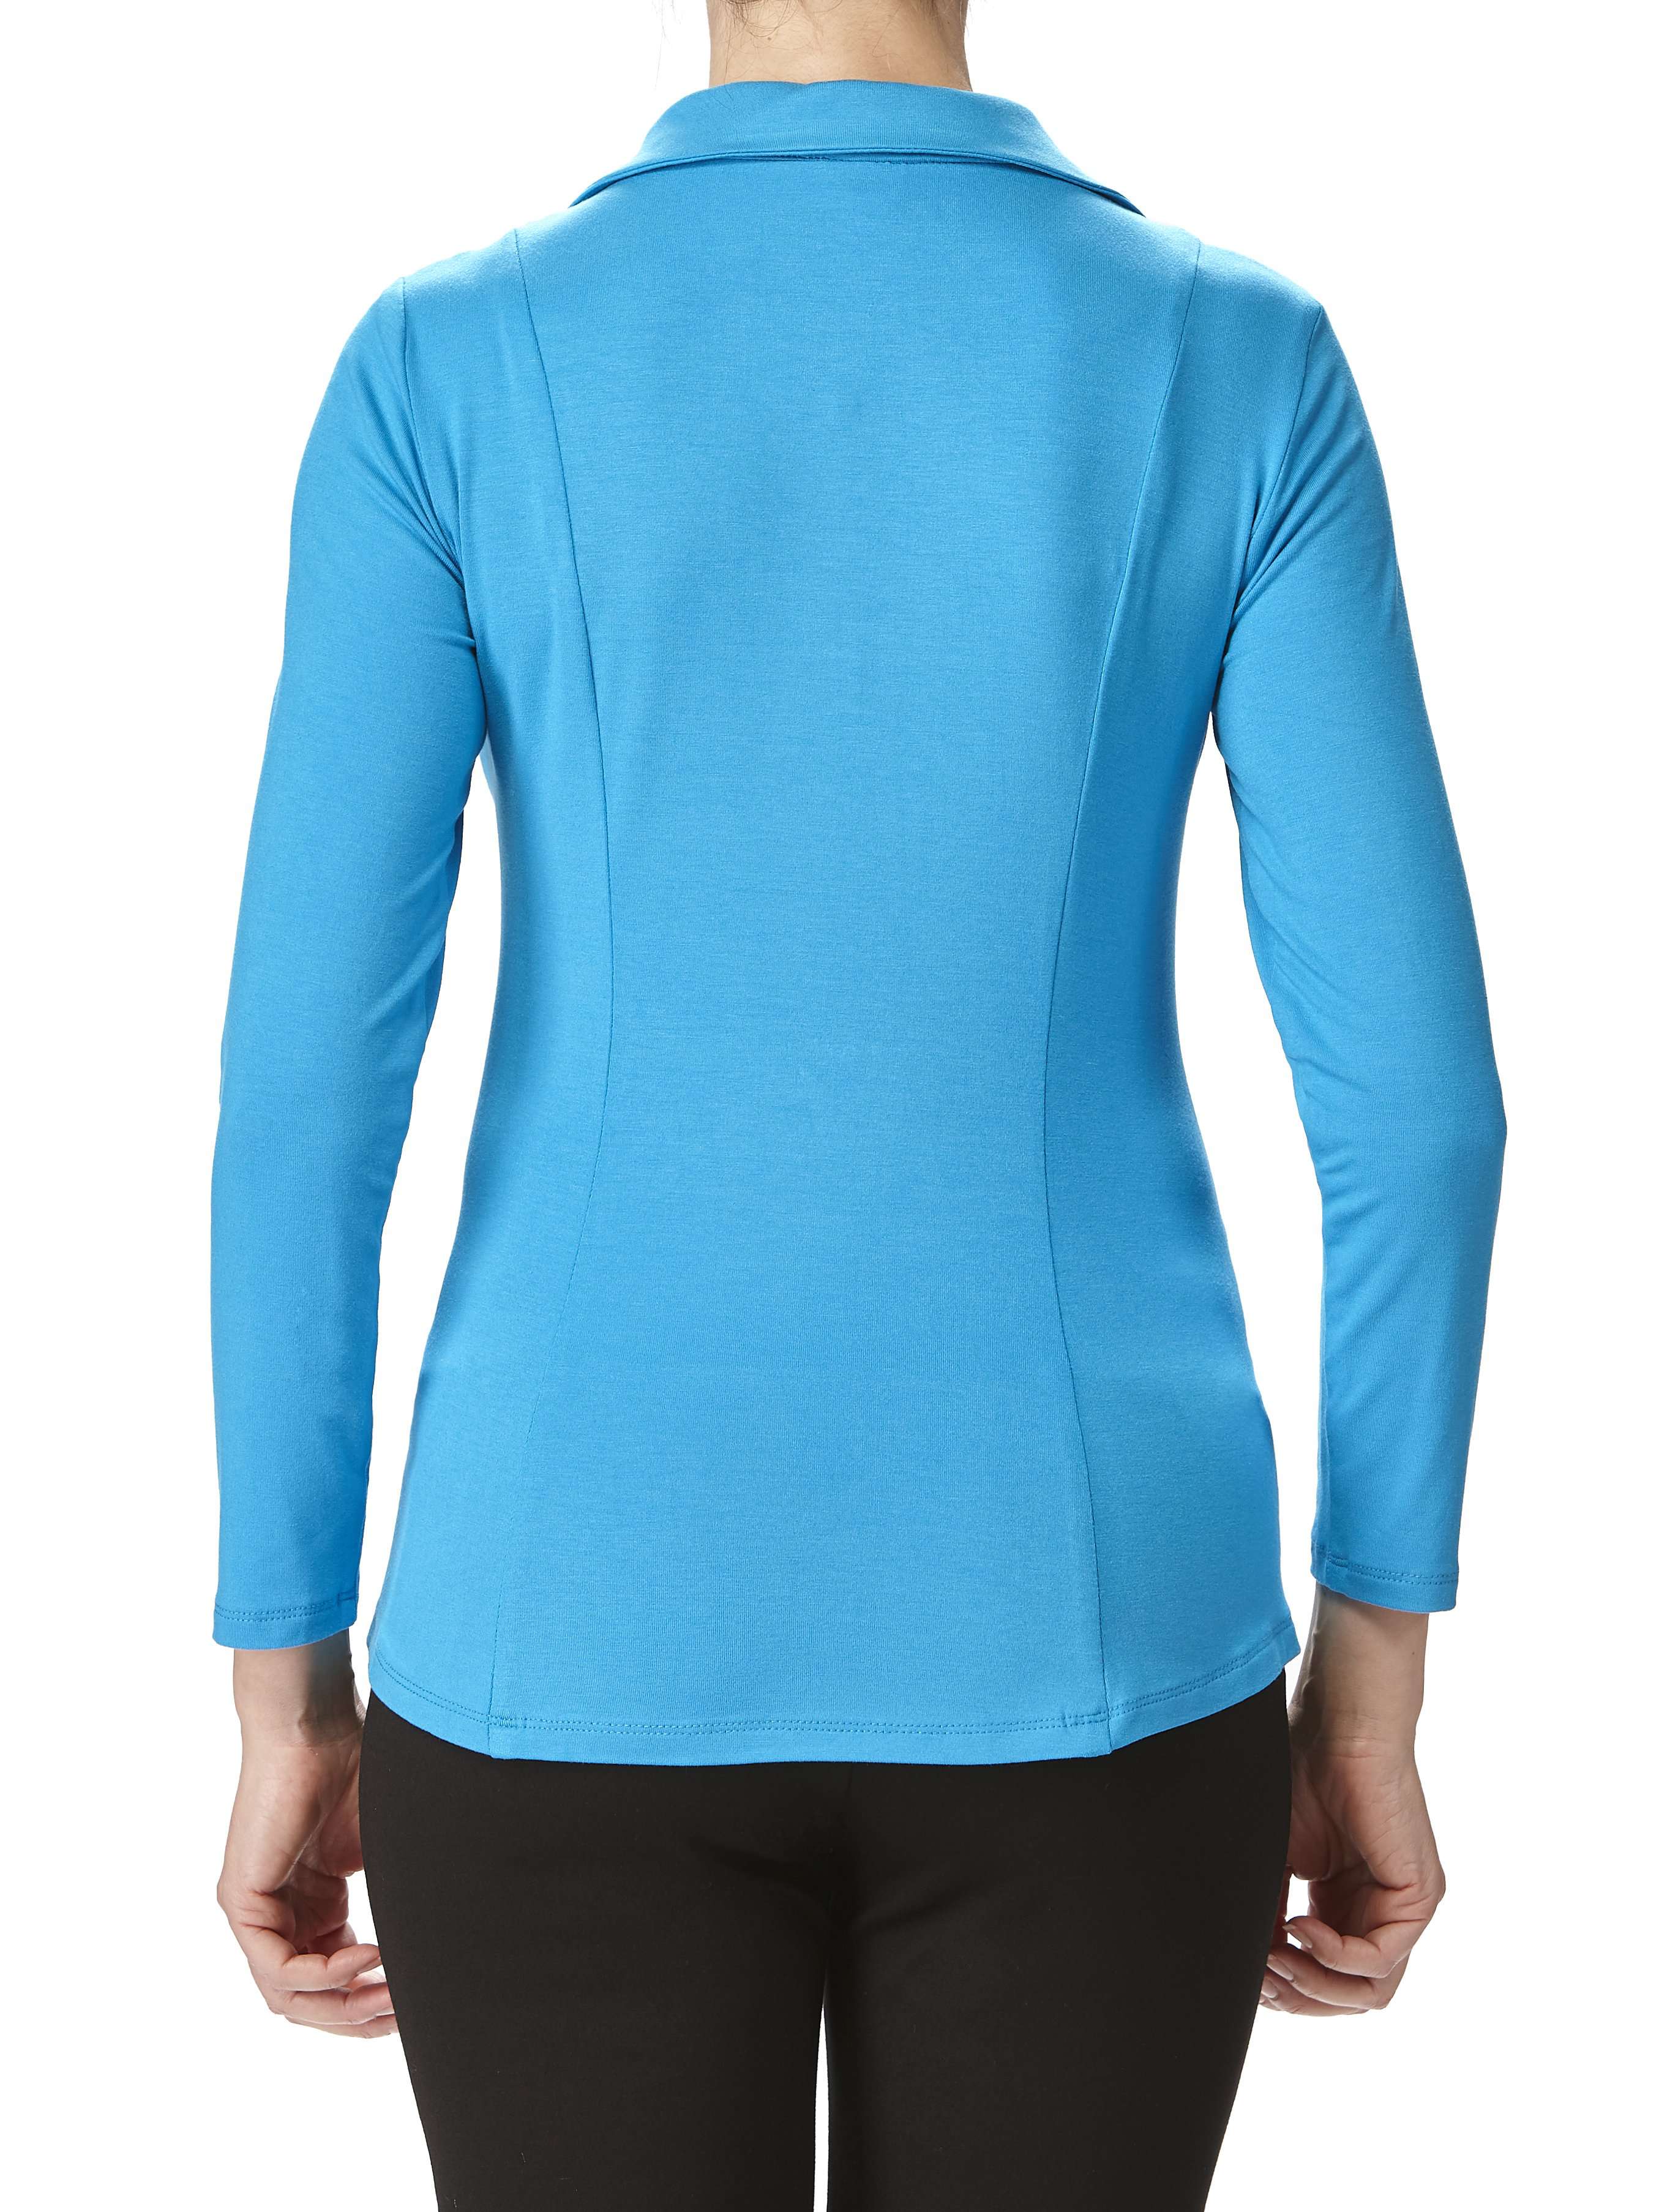 Women's Turquoise Blouse Amazing Quality Fit and Fabric Zipper Front Flattering Fit Proudly Made in Canada - Yvonne Marie - Yvonne Marie